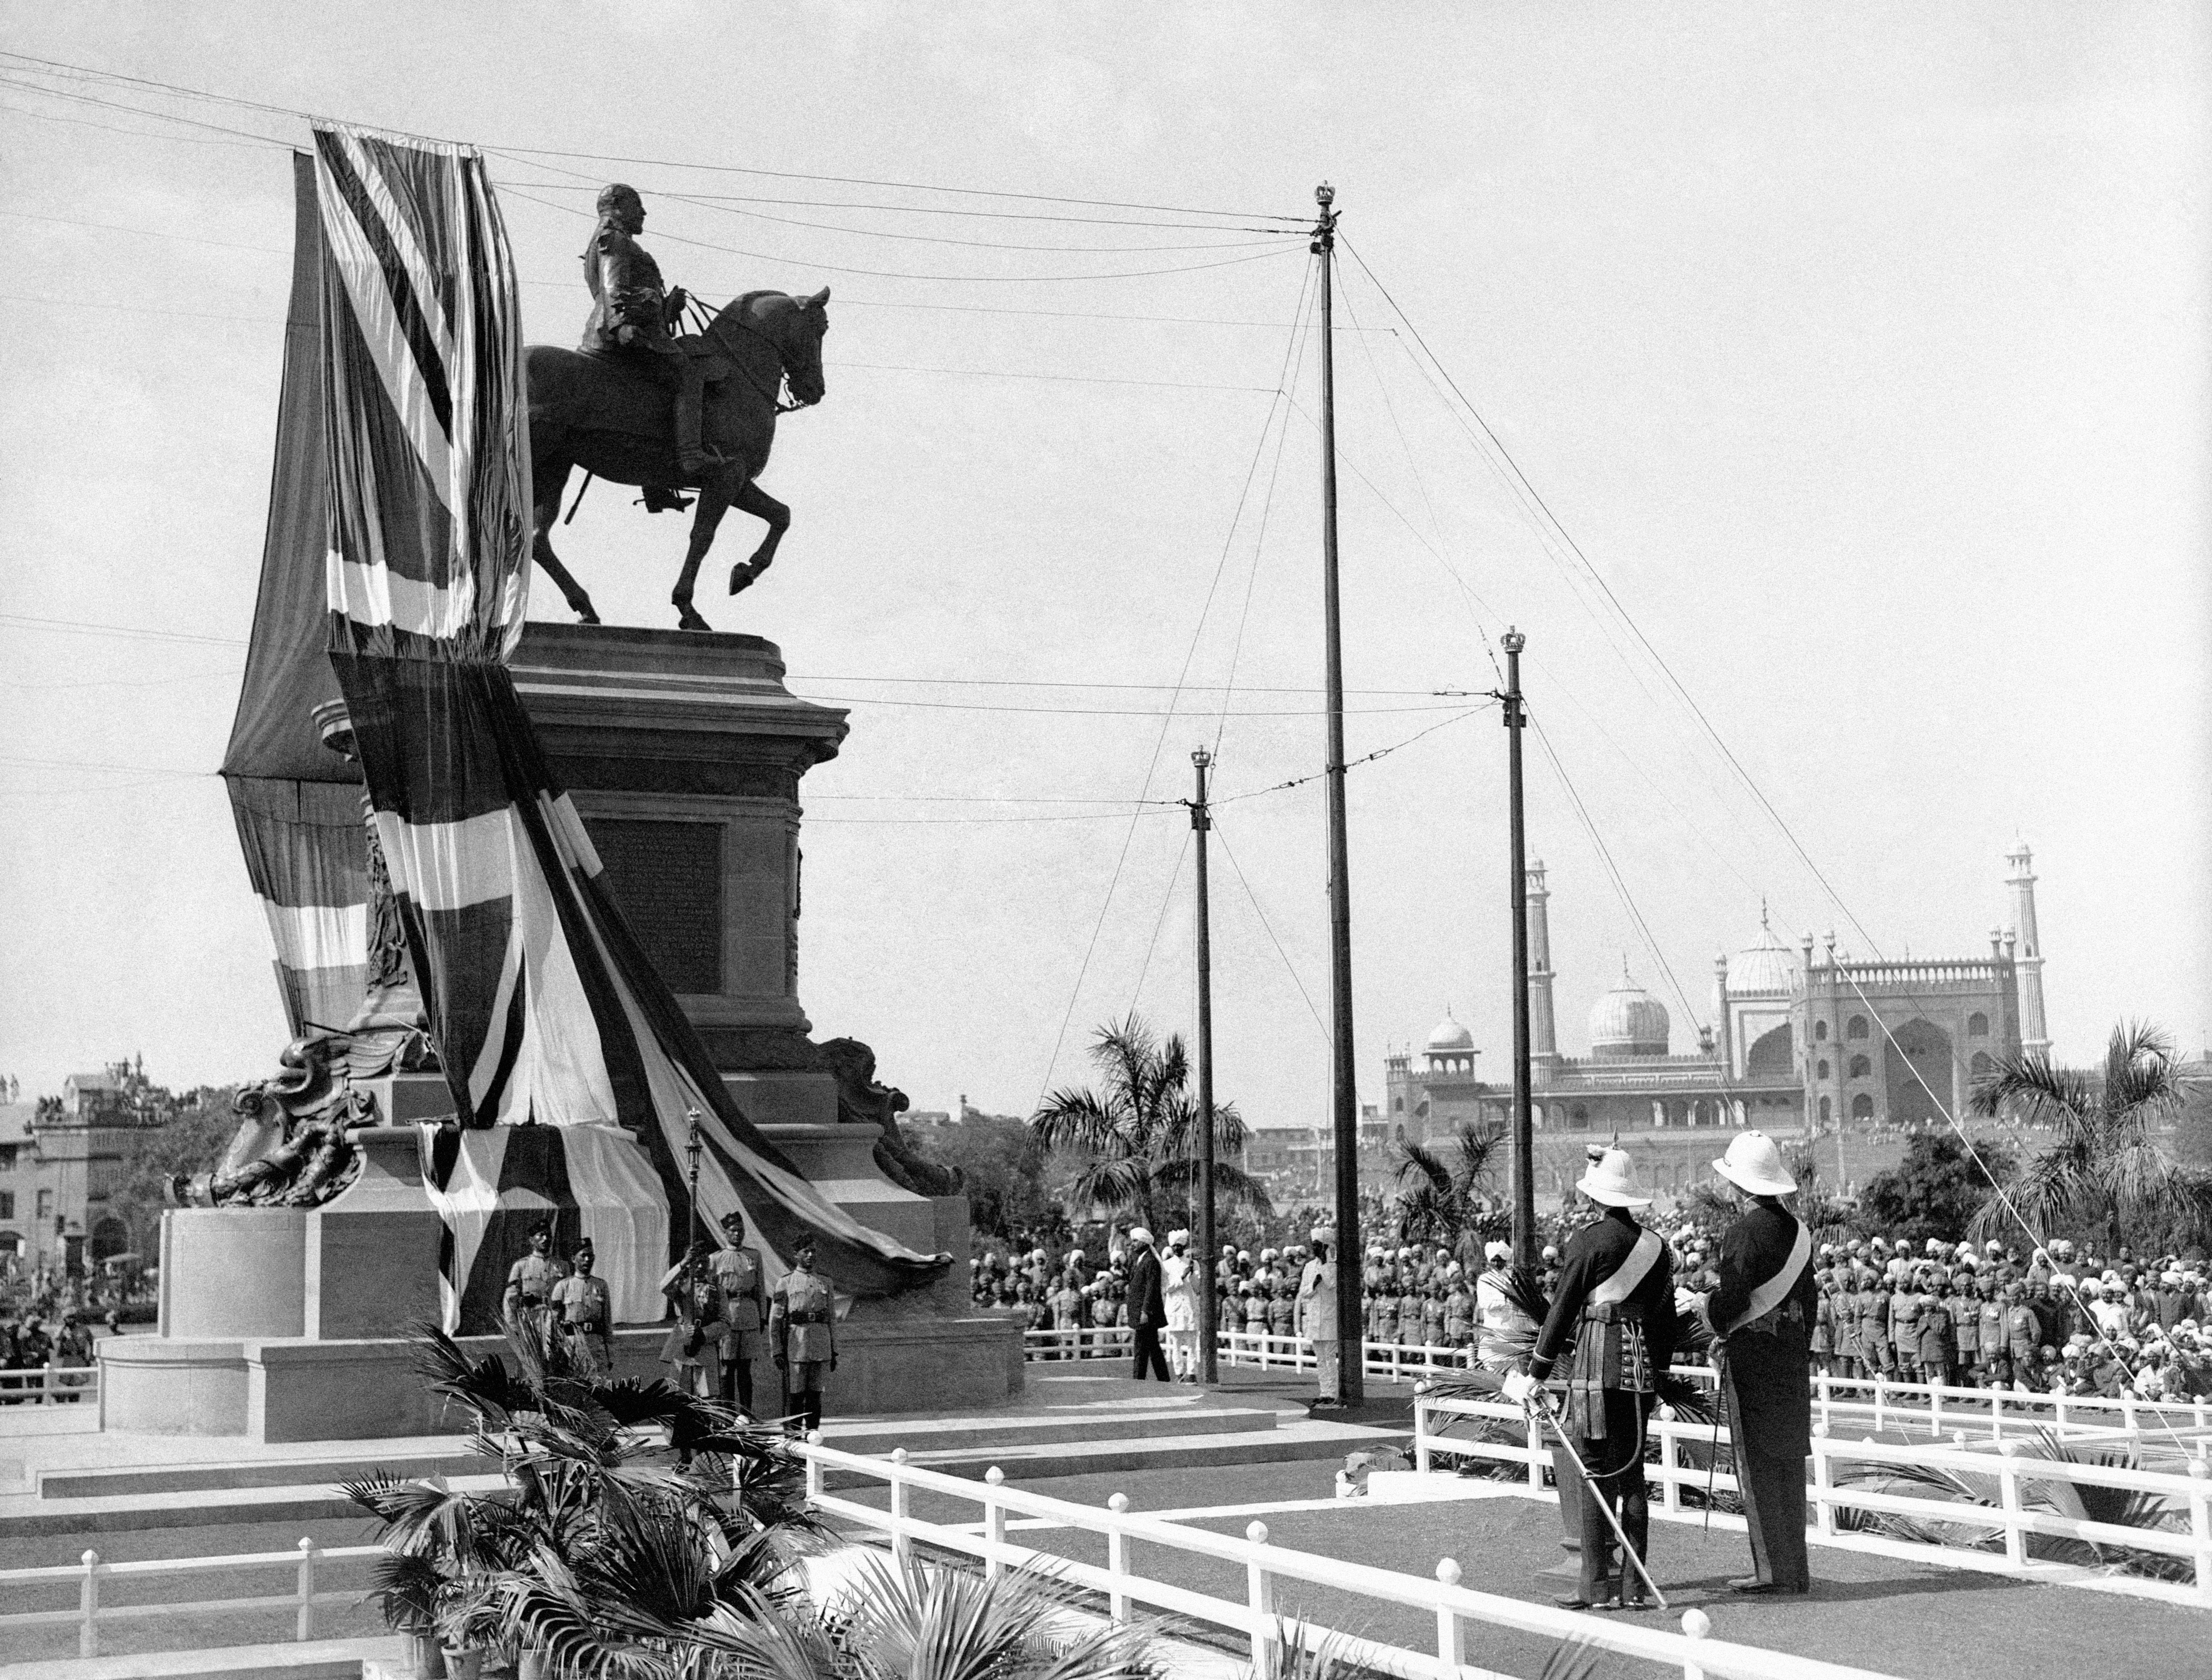 The prince at the unveiling ceremony of the King Edward VII Memorial in Delhi. By his side is the Viceroy of India, Lord Chelmsford